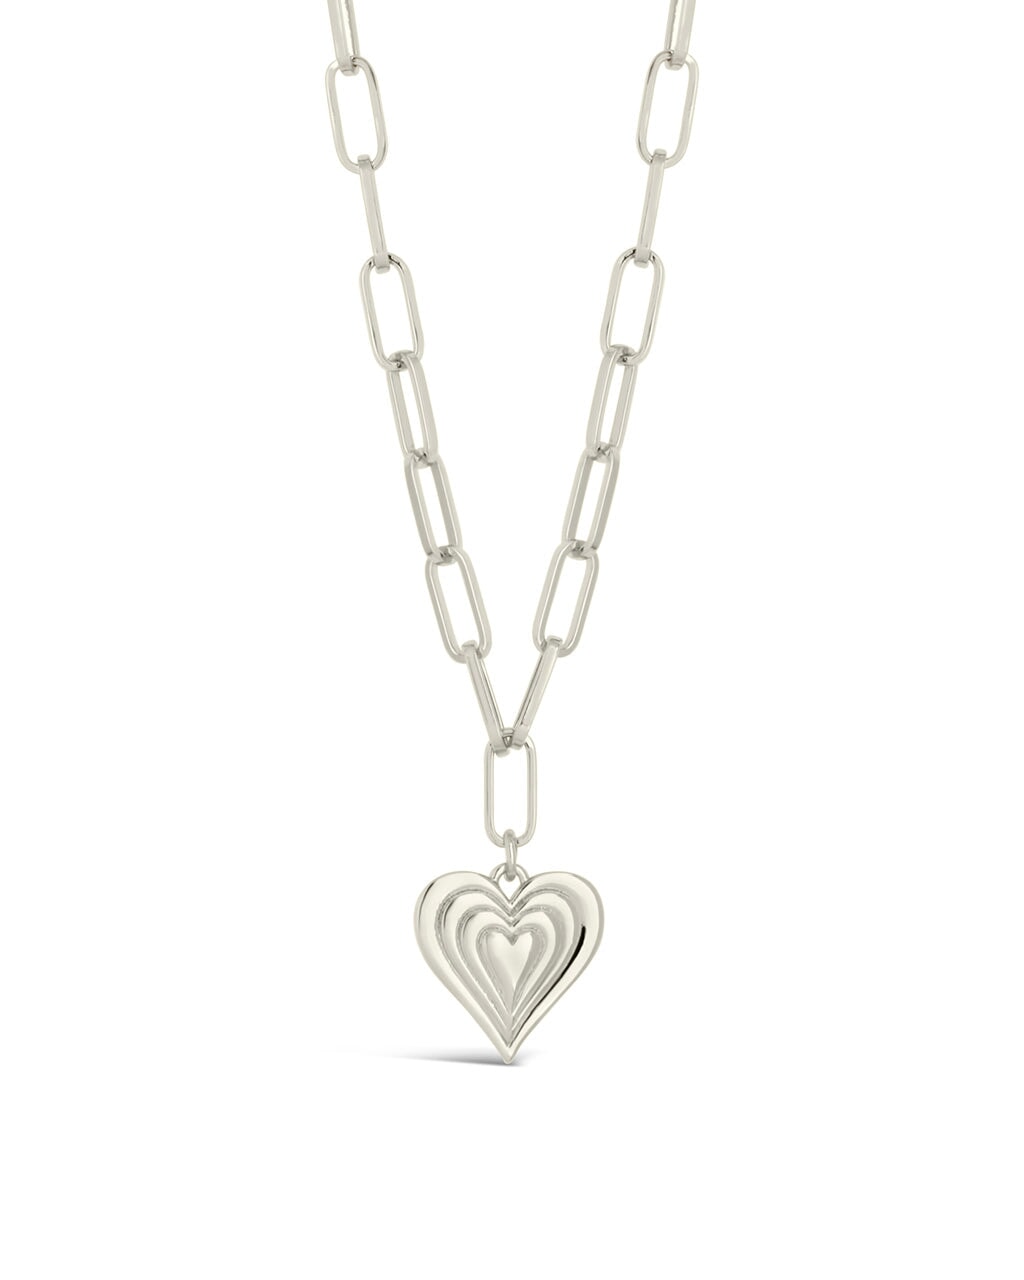 Beating Heart Pendant Necklace Necklace Sterling Forever Silver 